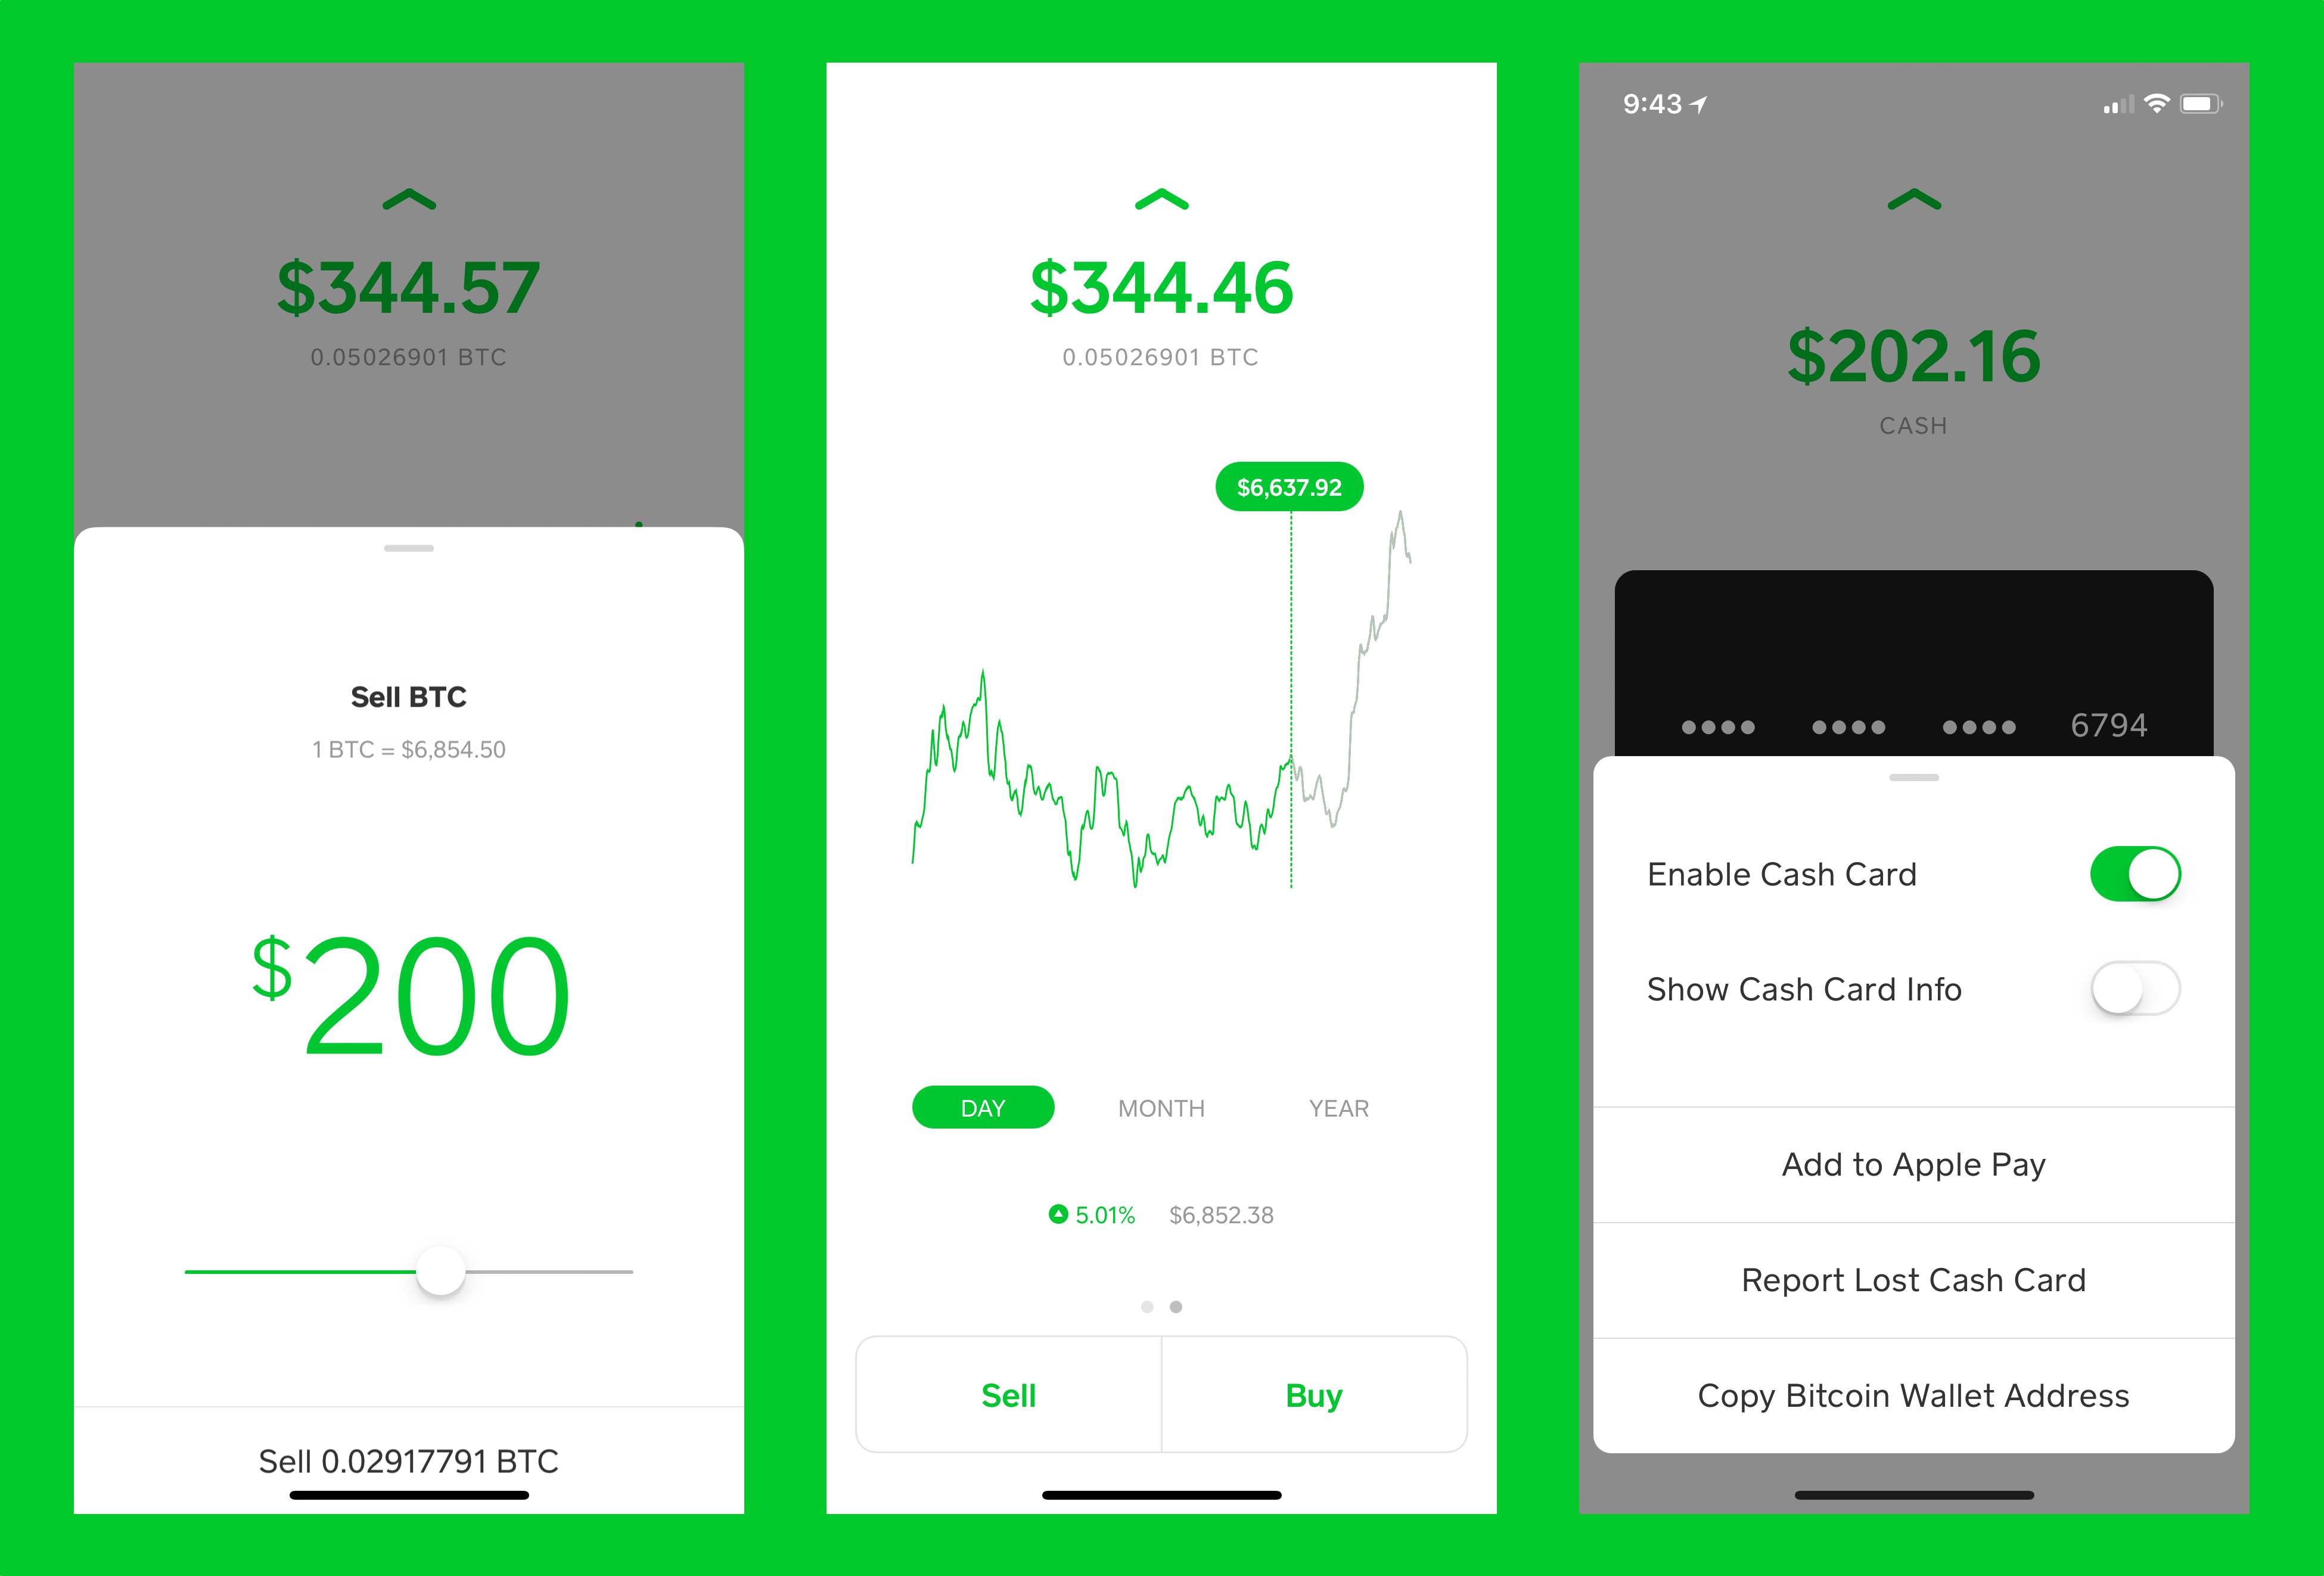 Square's Cash App Changes Withdrawal Policy for Bitcoin | CoinMarketCap